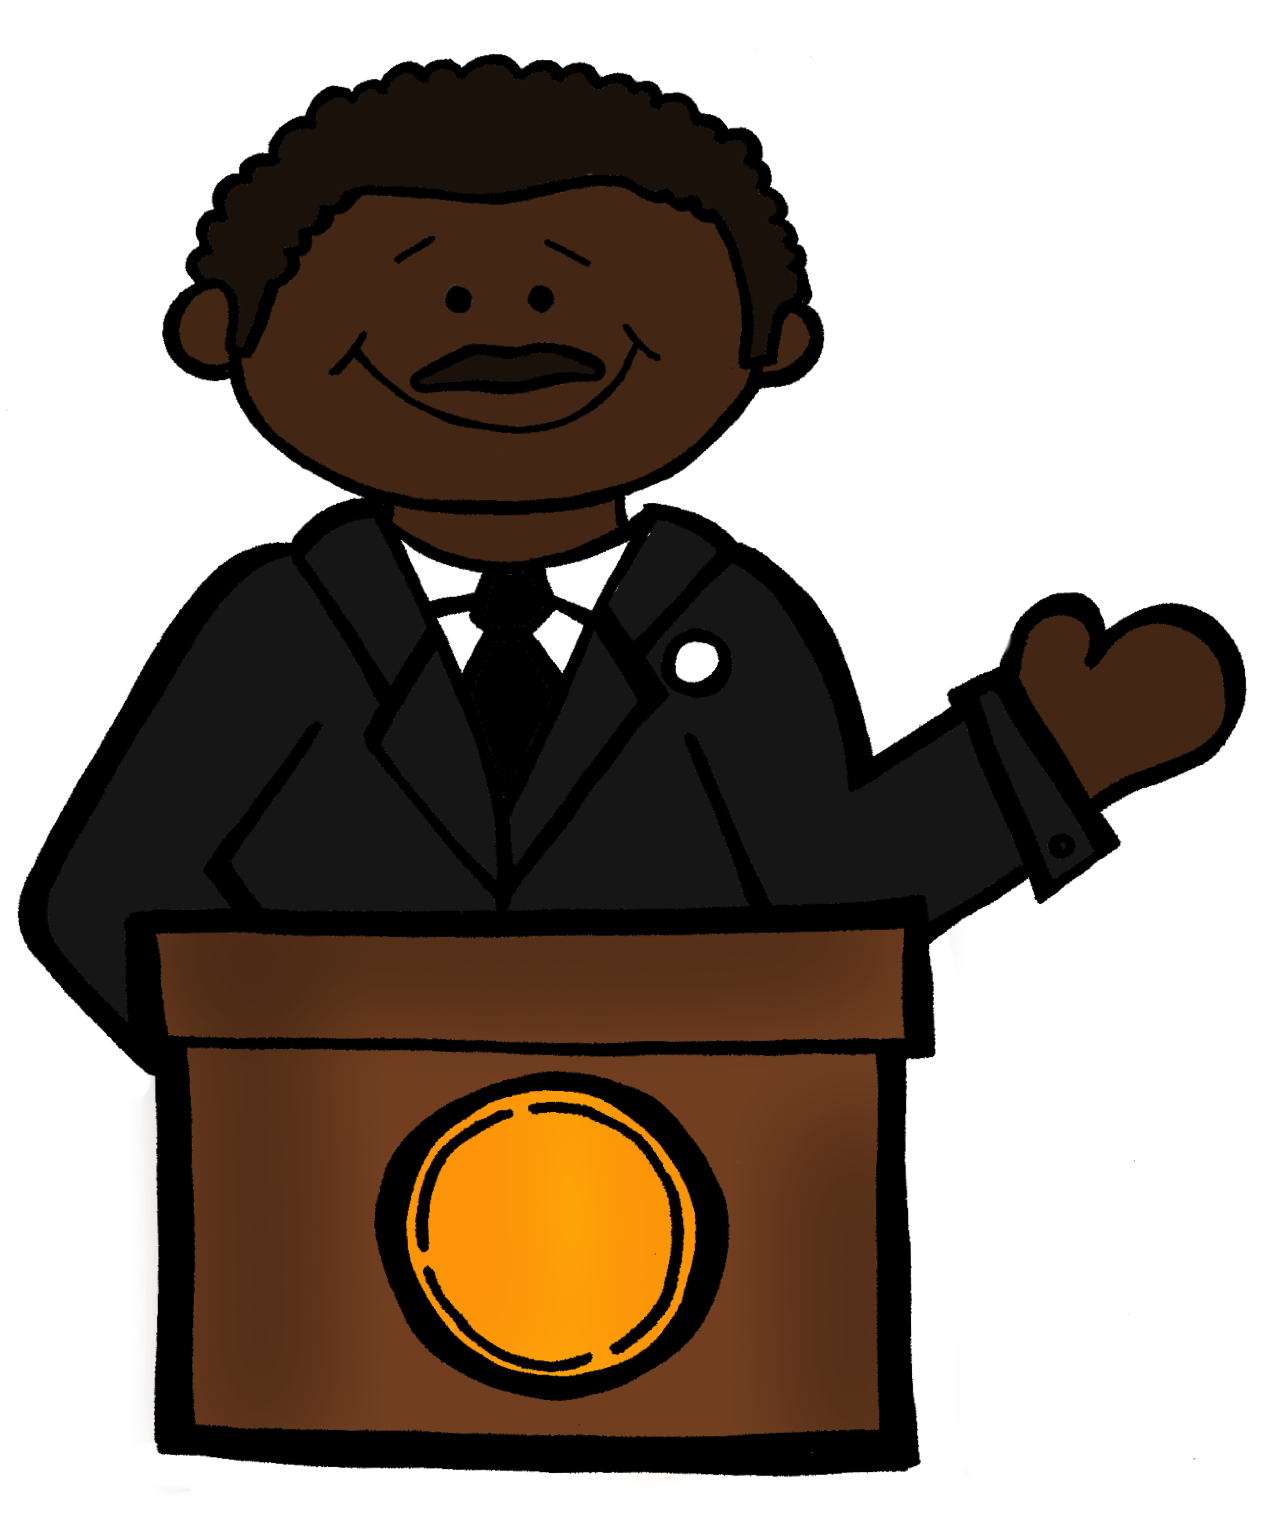 Martin Luther King Clip Art